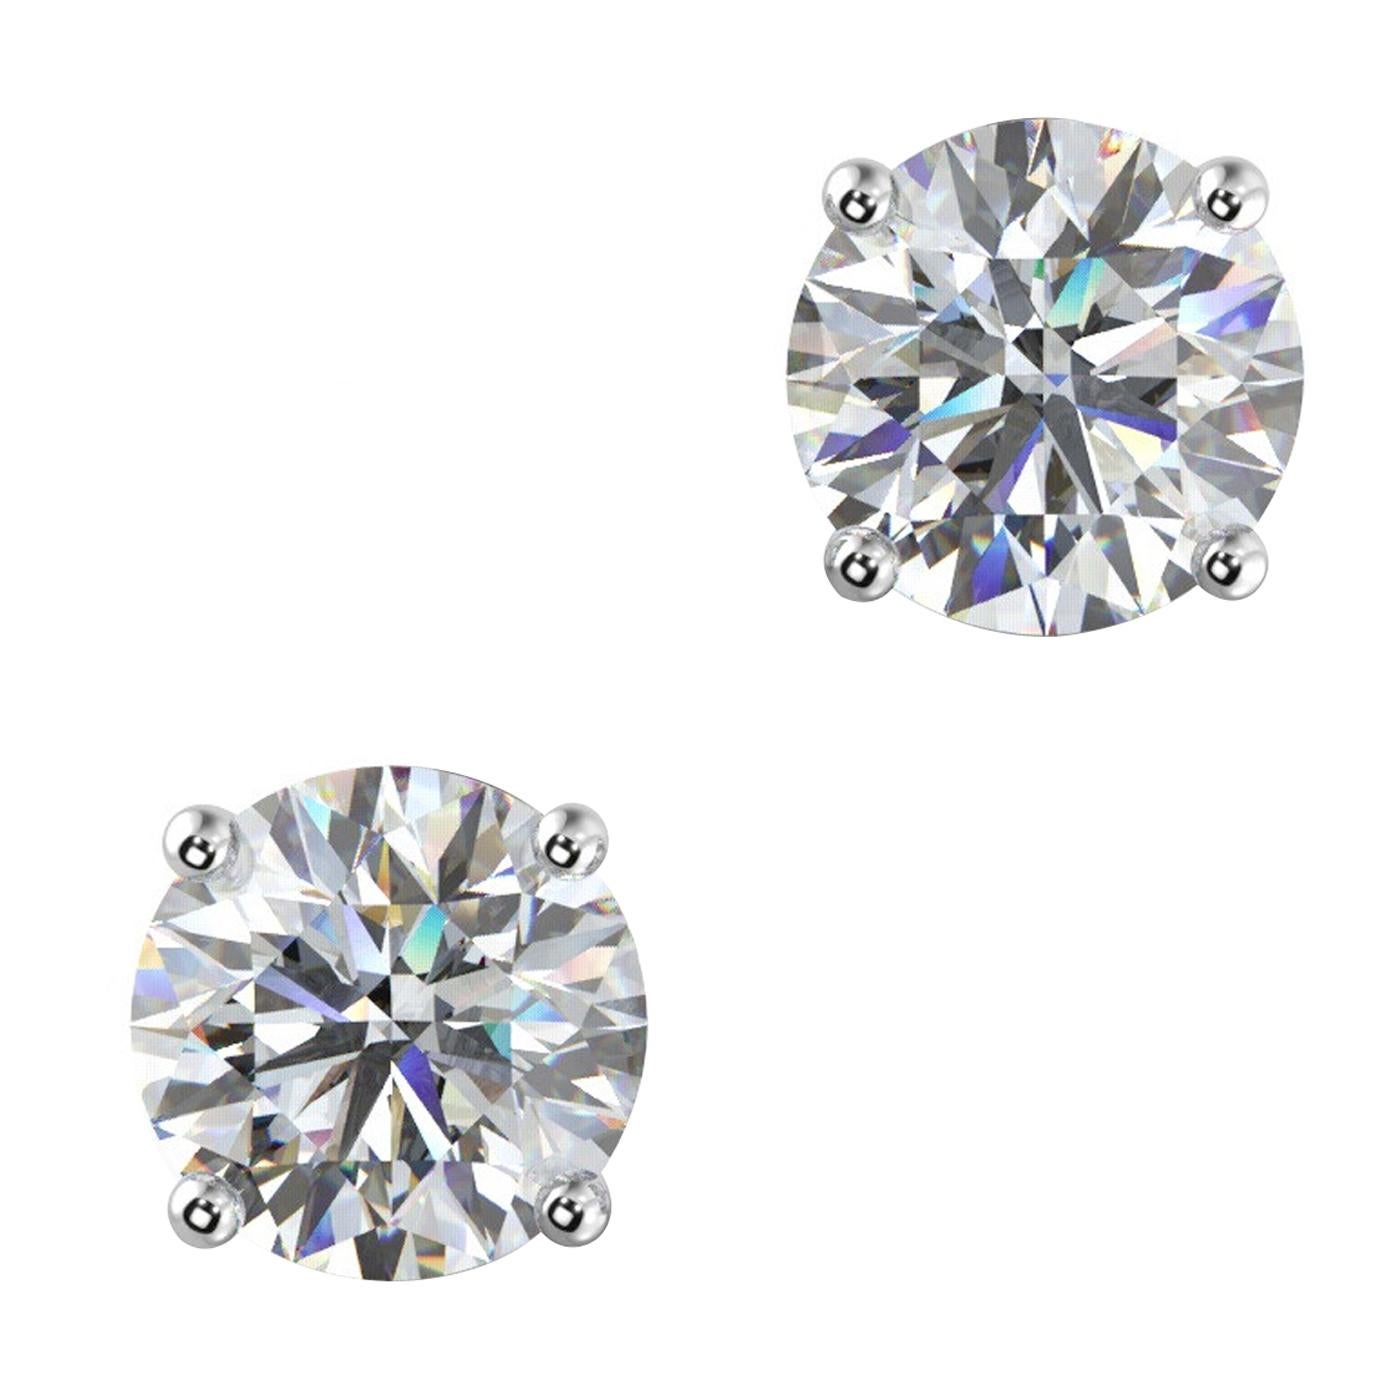 4.74ct Natural Round Diamond 4-Prong Martini Setting Stud Earrings Screw Back In Good Condition For Sale In Aventura, FL